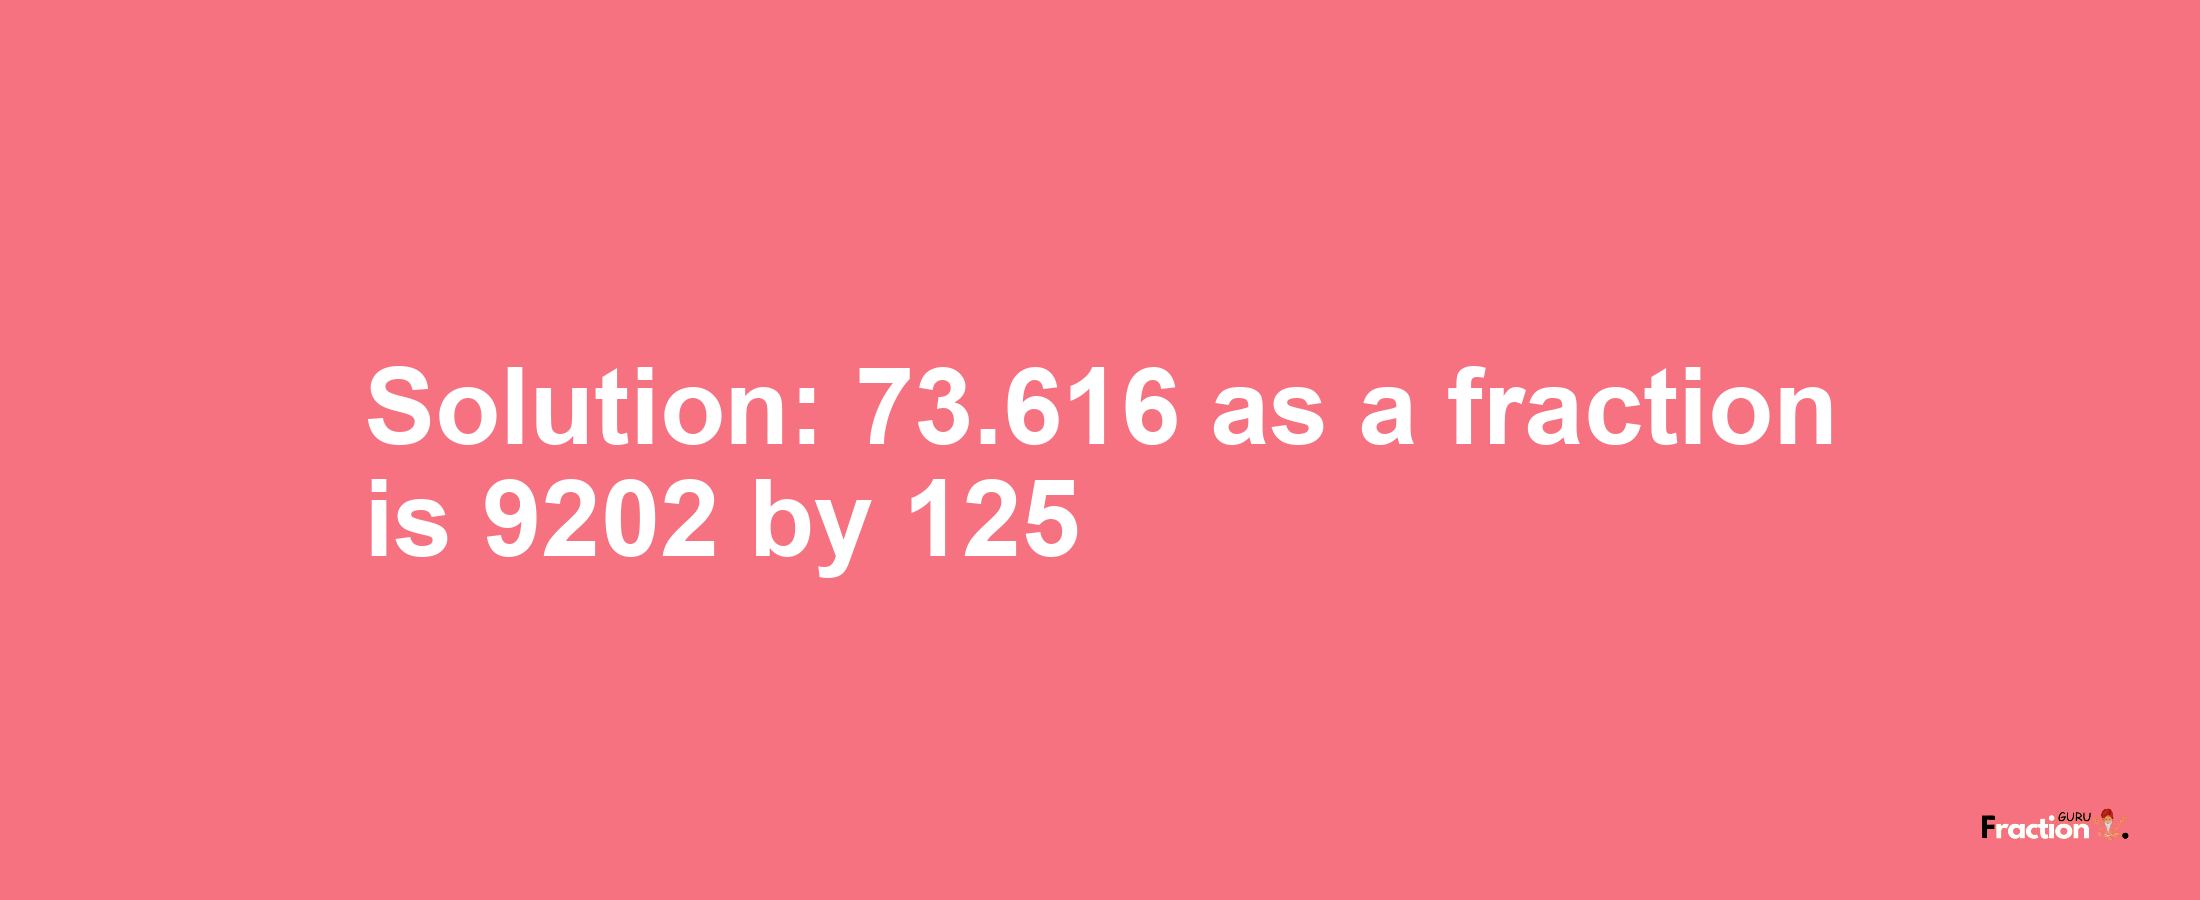 Solution:73.616 as a fraction is 9202/125